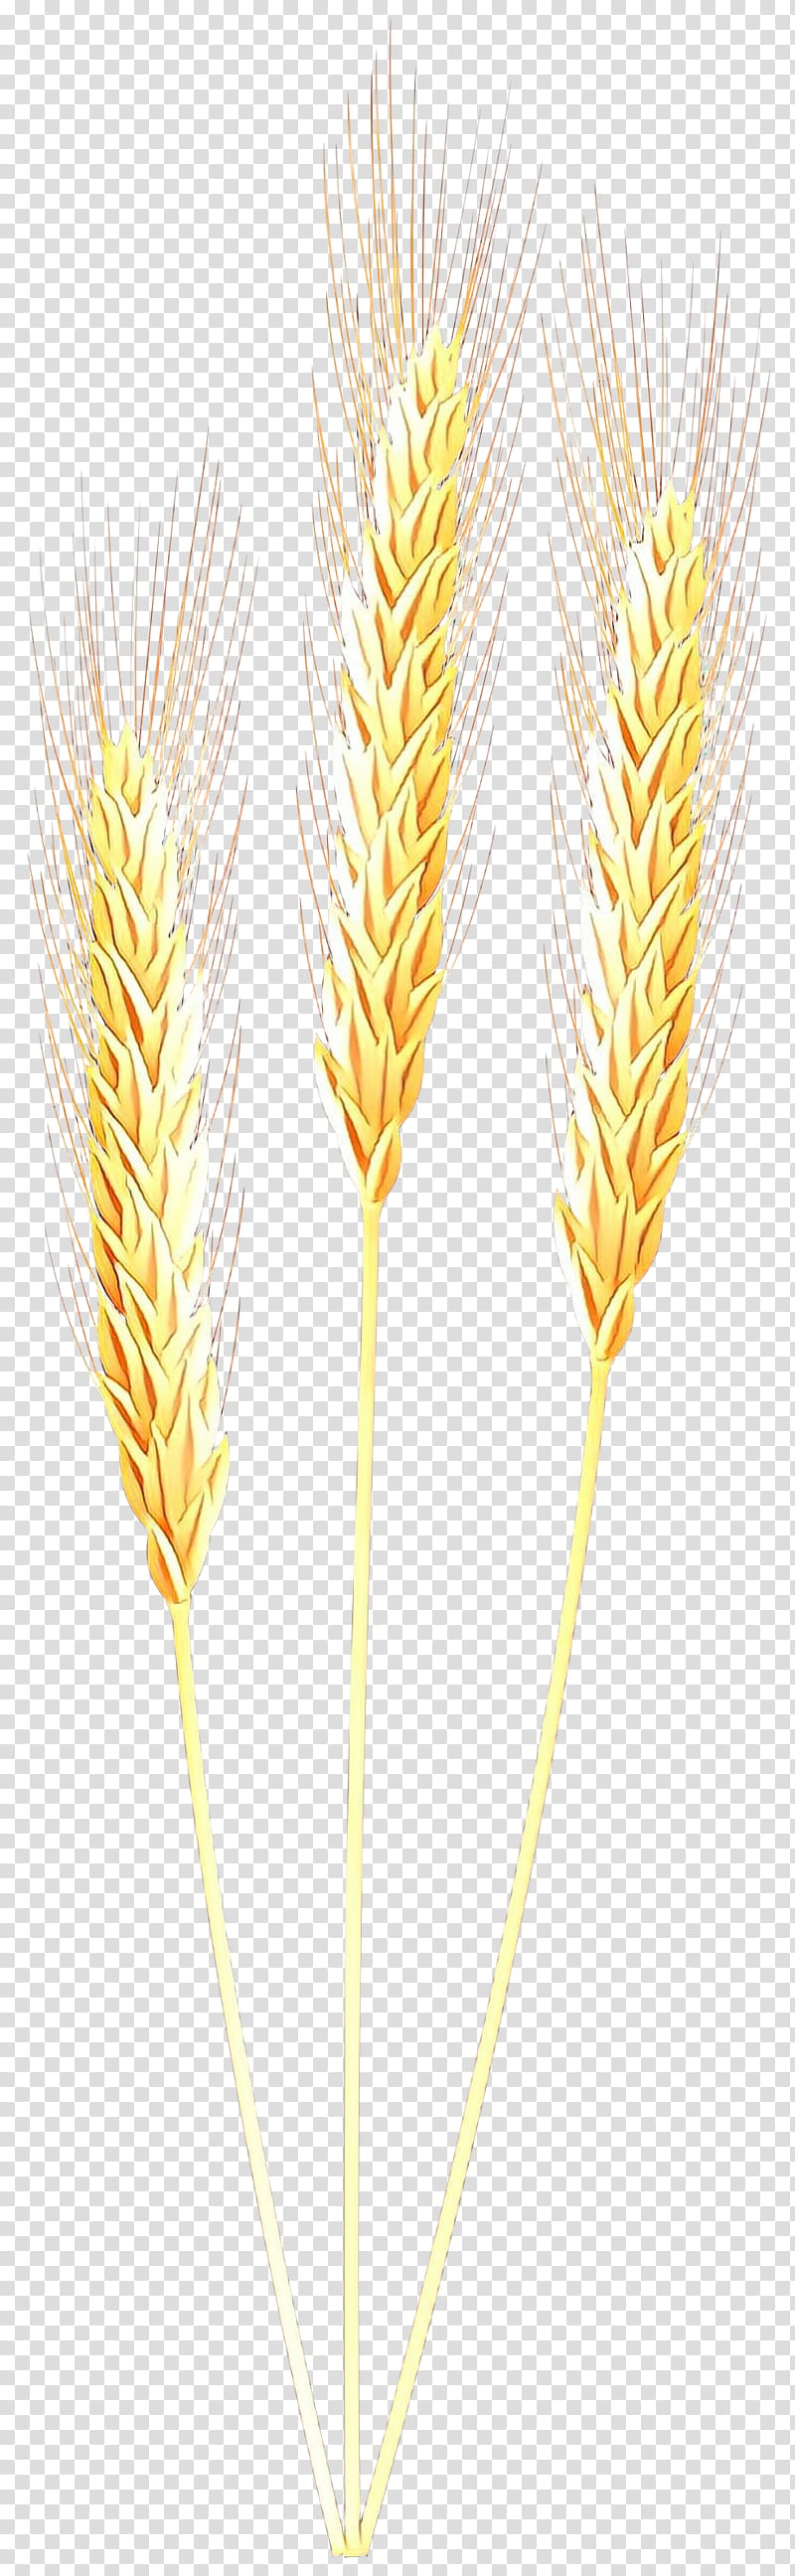 Wheat, Emmer, Cereal Germ, Barleys, Yellow, Grass Family, Plant, Food Grain transparent background PNG clipart